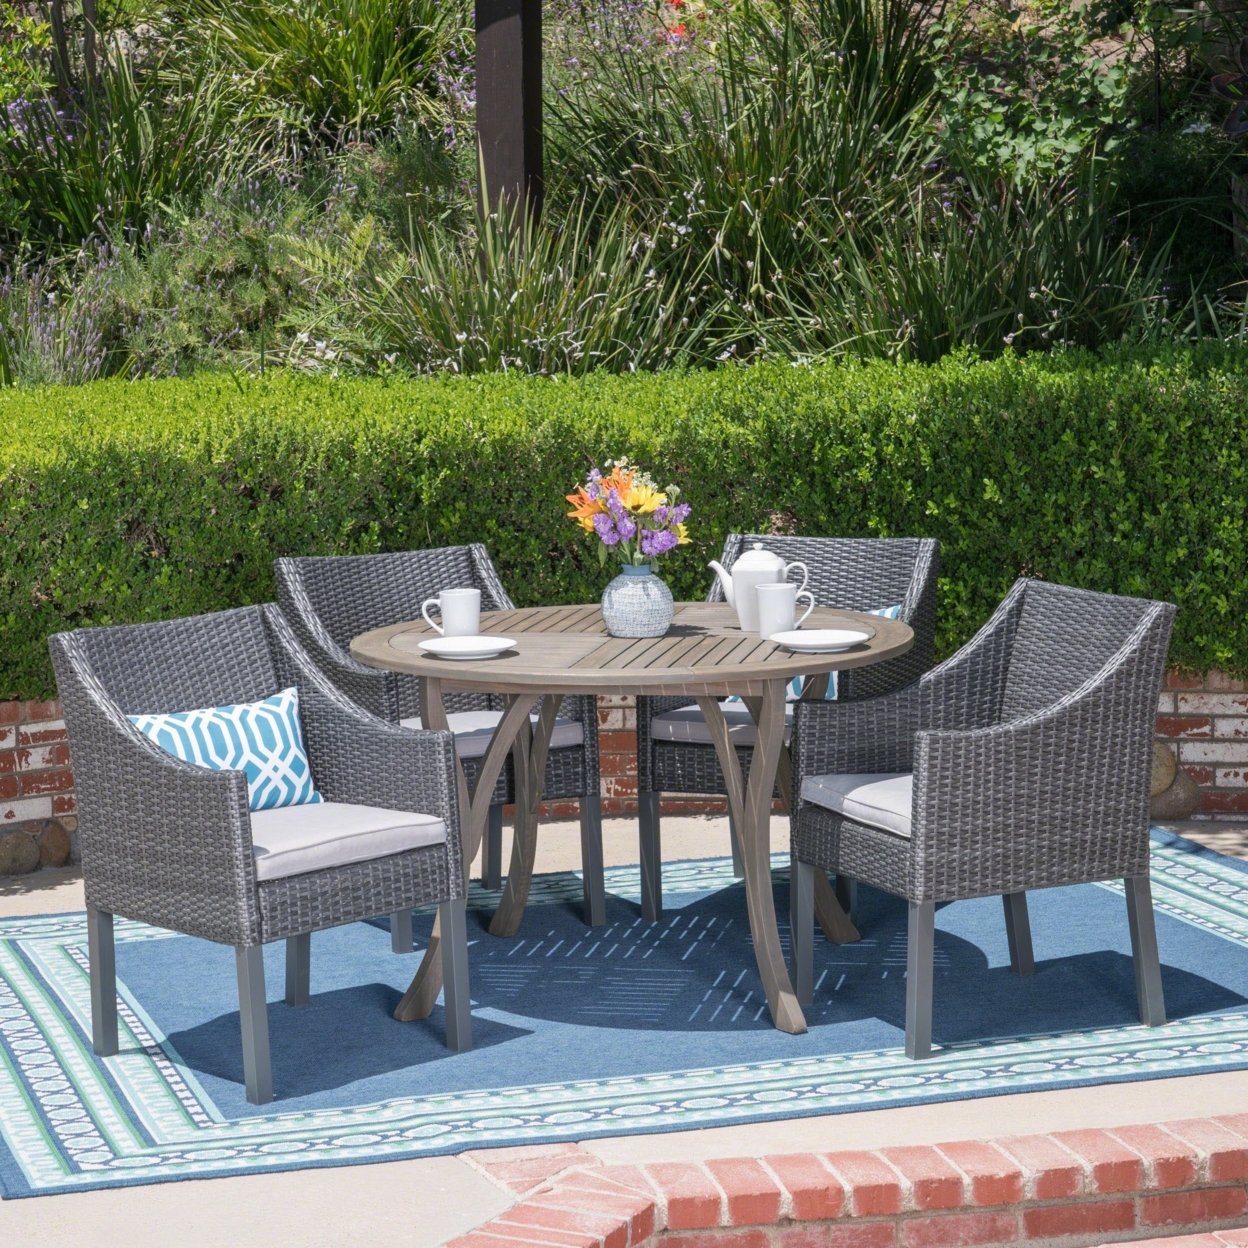 Tycie Outdoor 5 Piece Acacia Wood And Wicker Dining Set, Gray With Gray Chairs